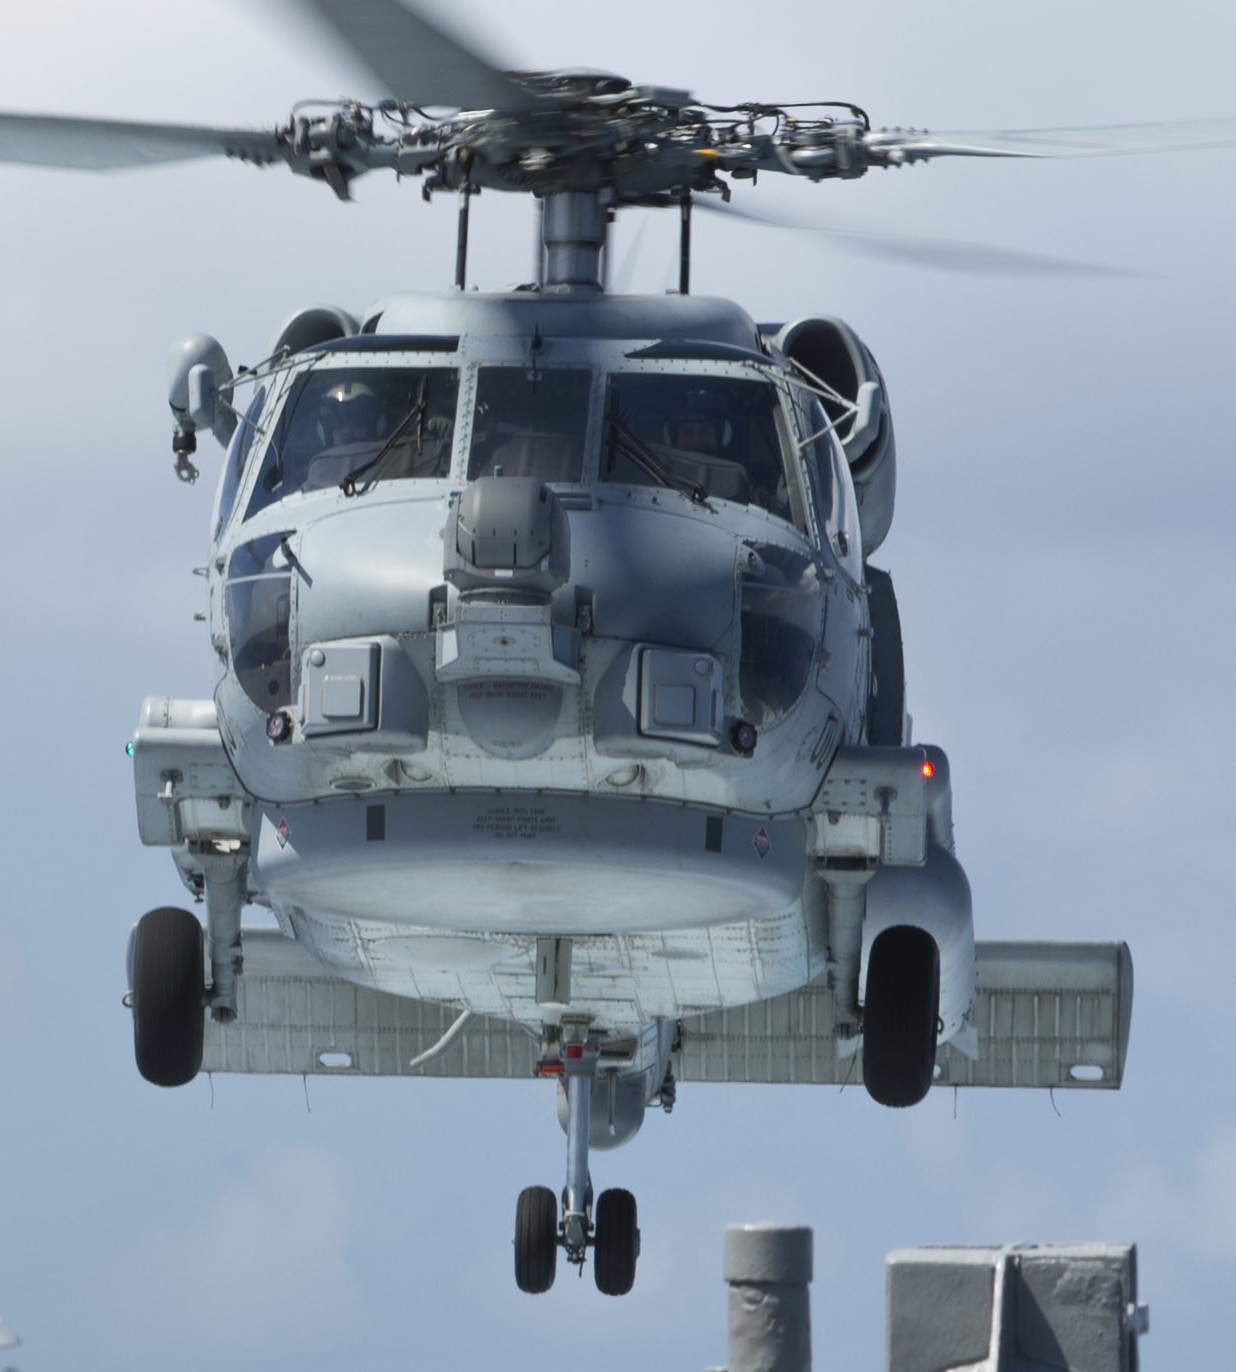 hsm-51 warlords helicopter maritime strike squadron mh-60r seahawk navy 2014 67